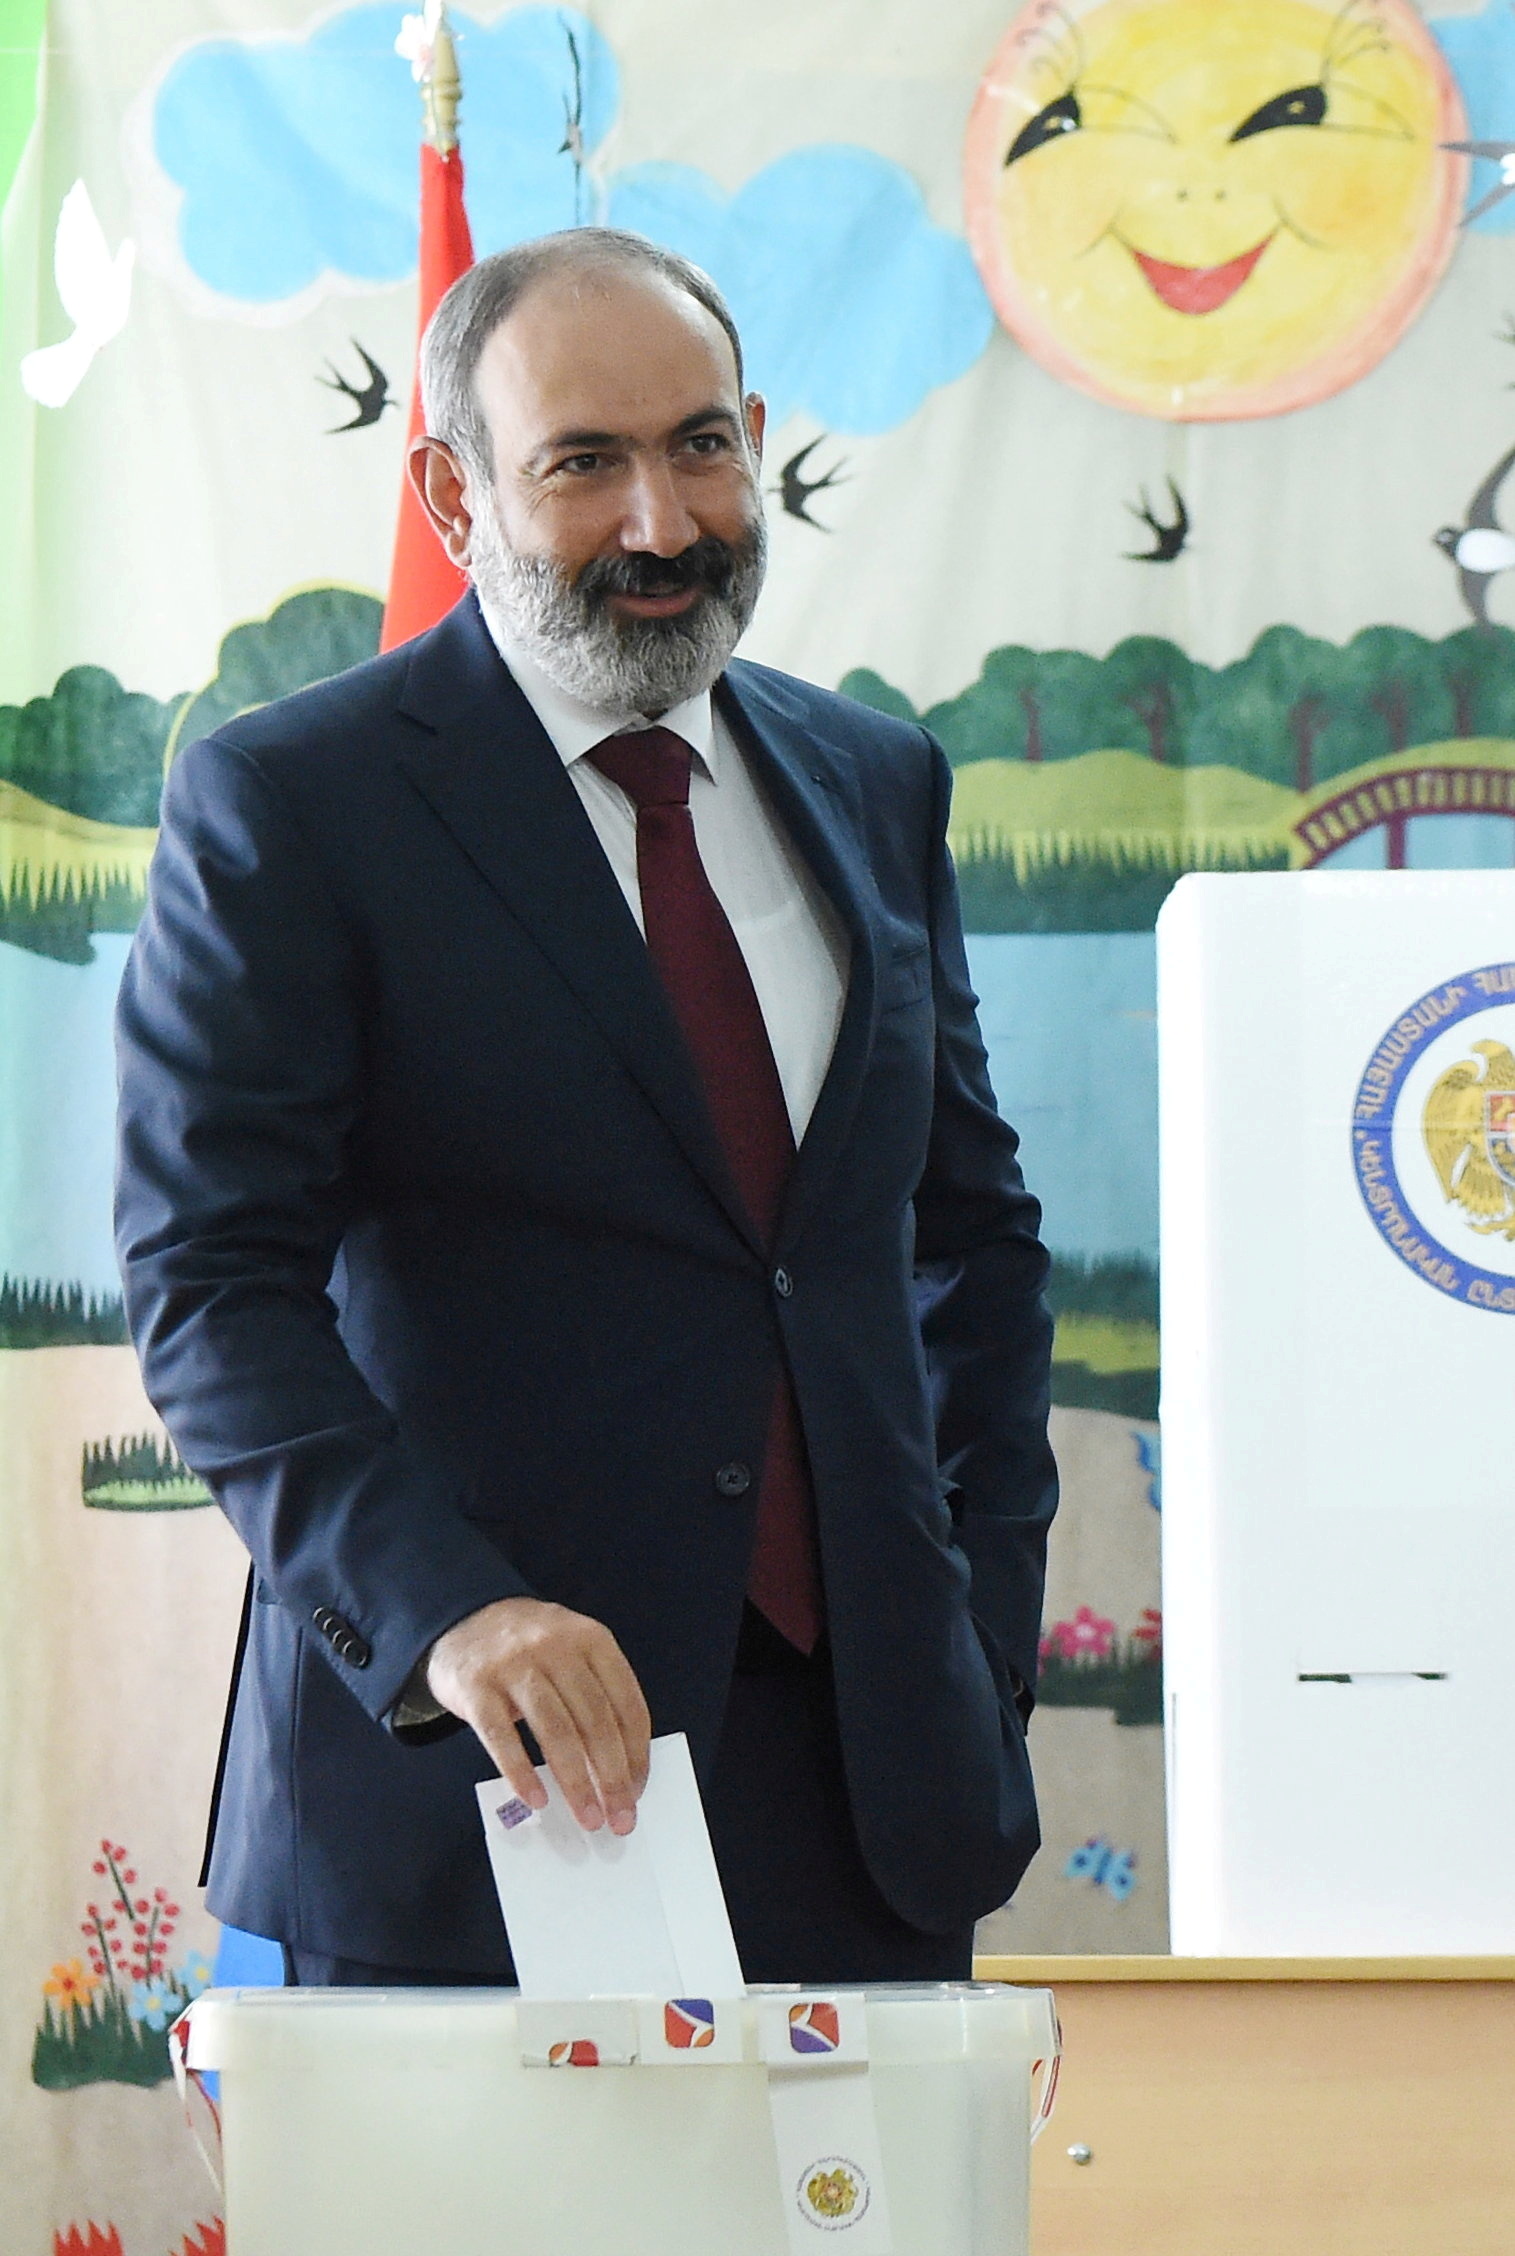 Leader of Civil Contract party Nikol Pashinyan casts his vote during the snap parliamentary election in Yerevan